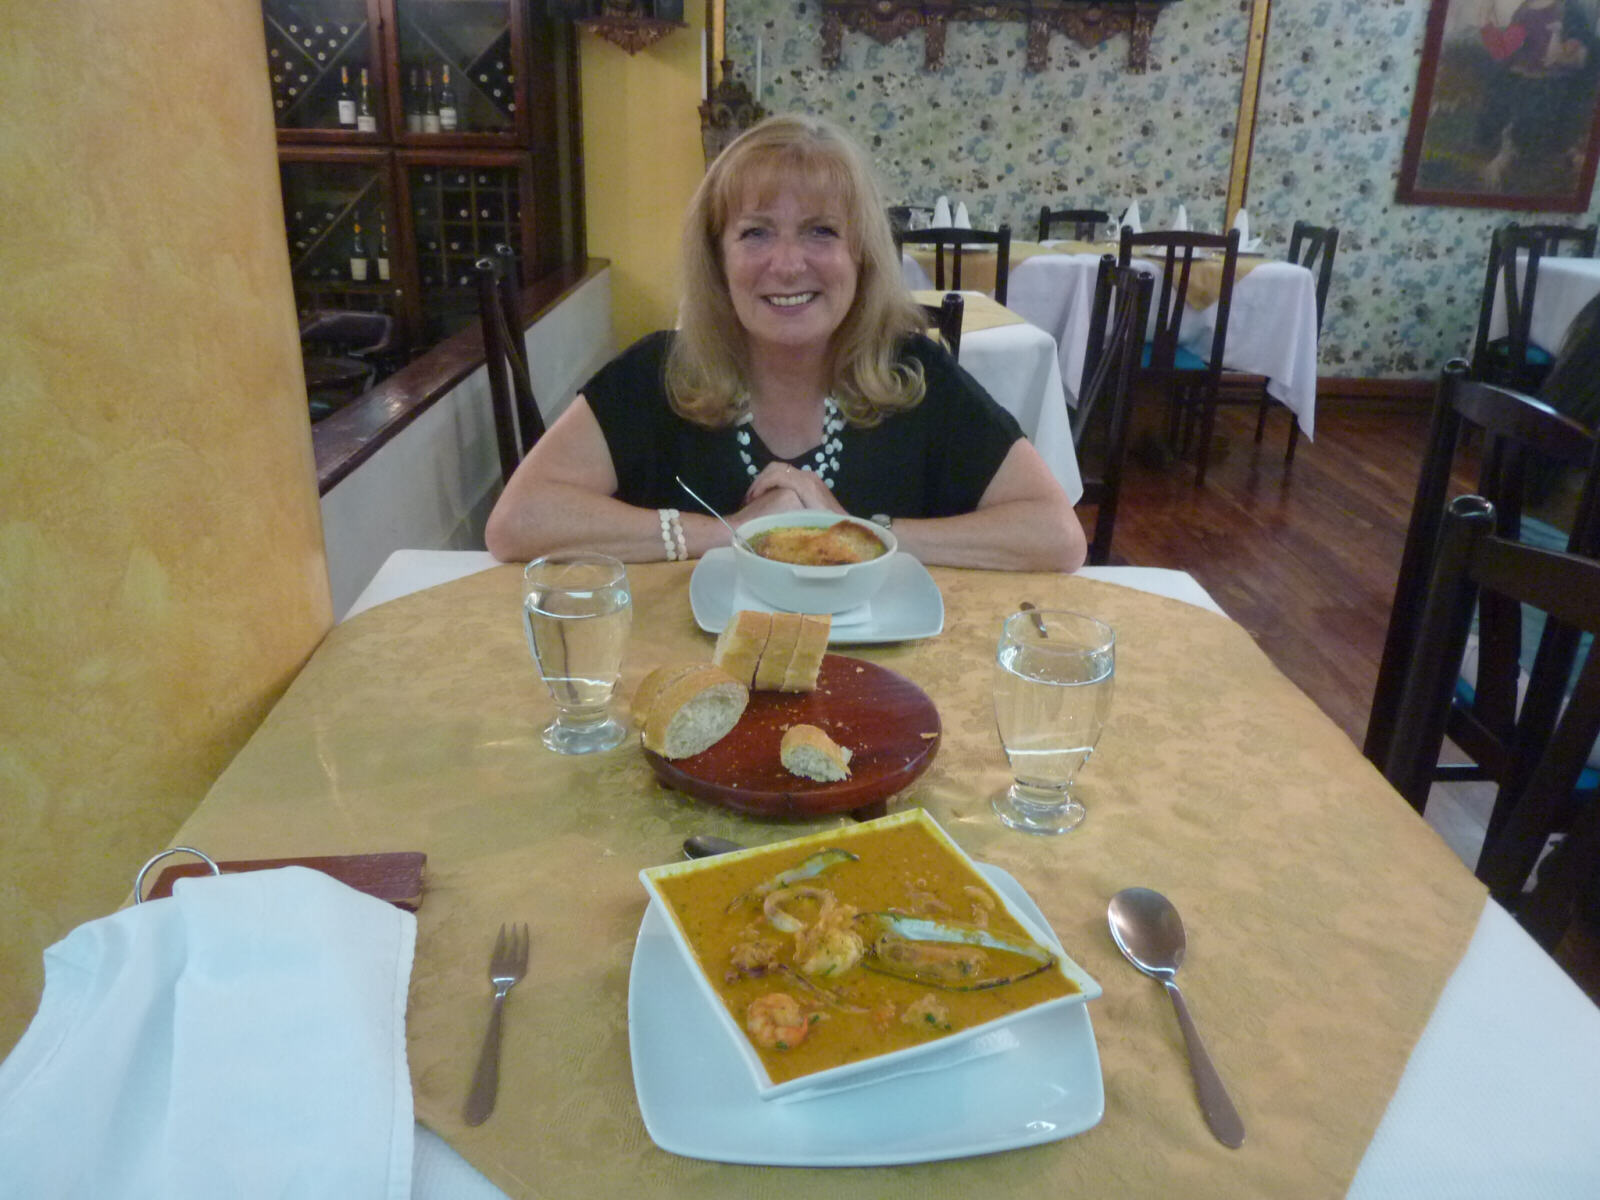 Unesco prize soup at Camino Real hotel, Popayan, Colombia